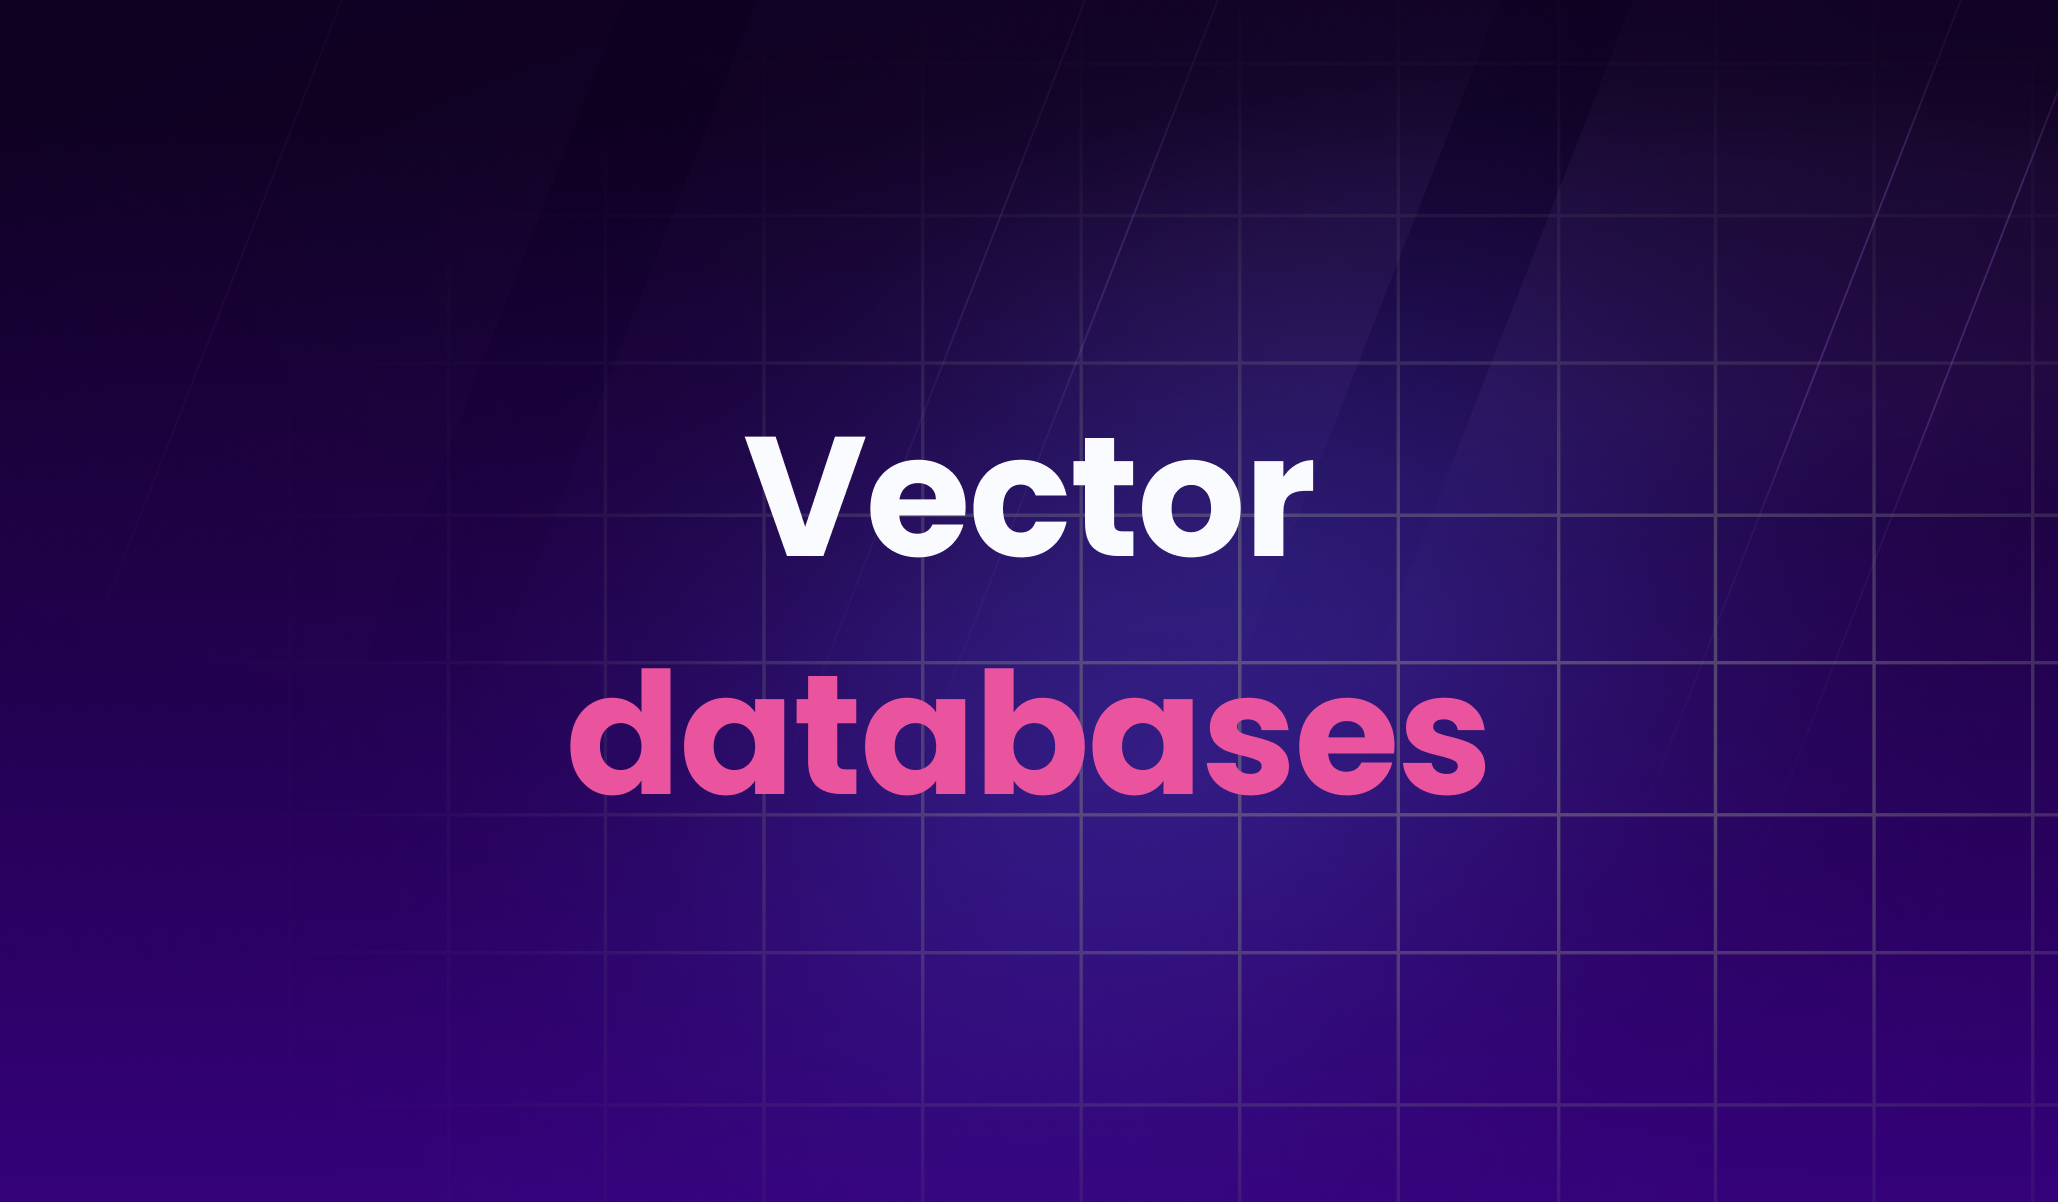 What is a vector database?